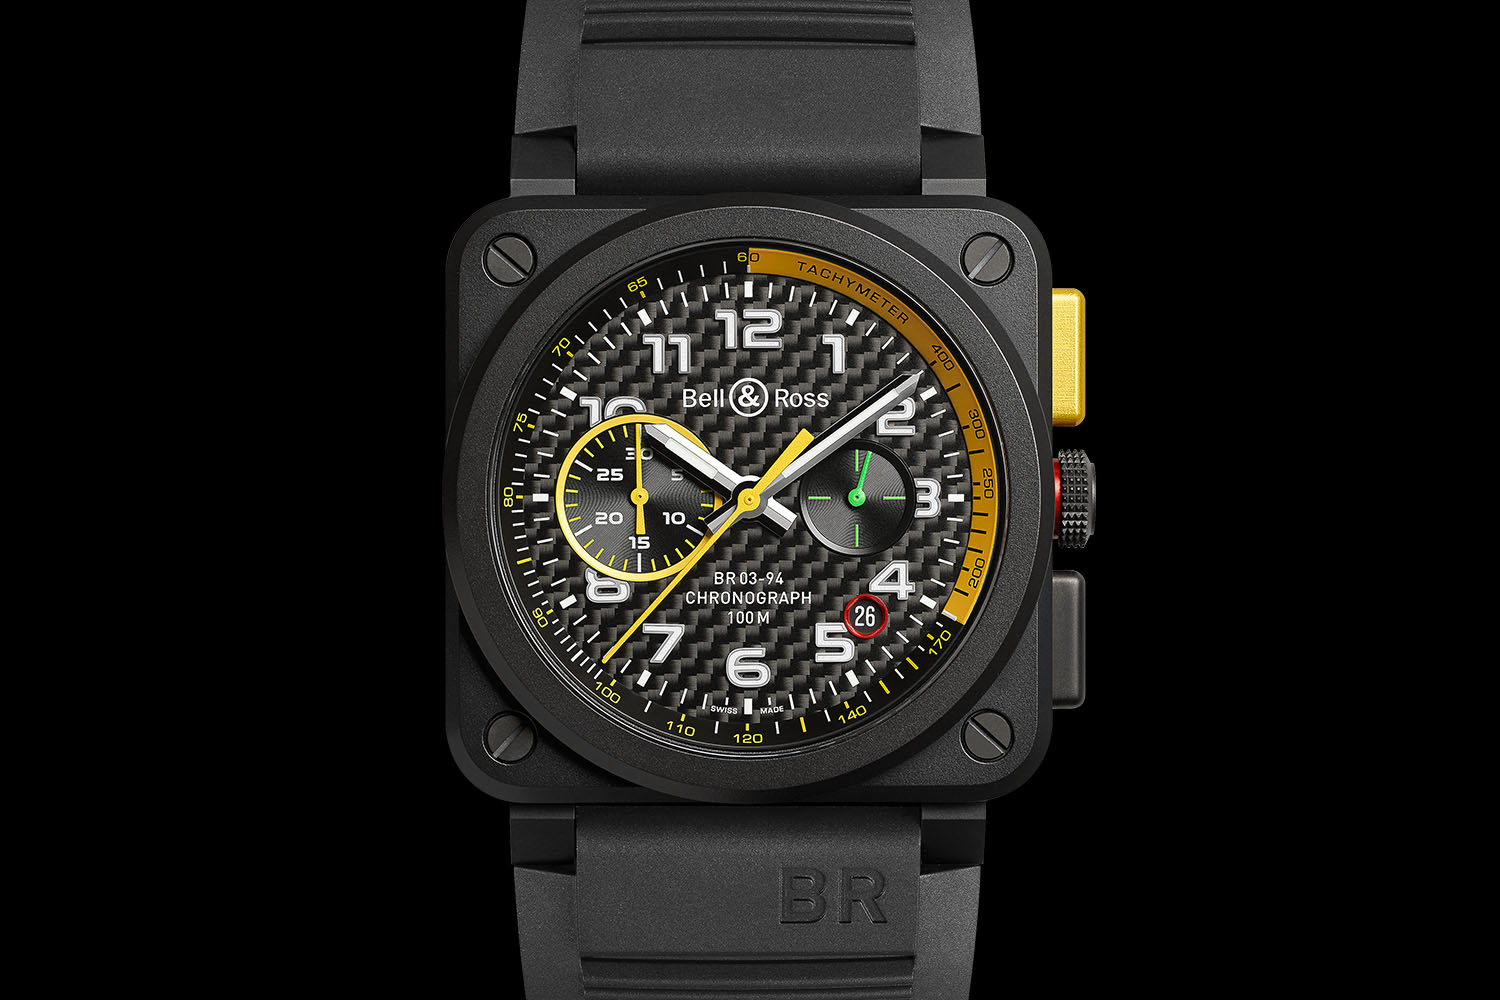 What type of watches does Bell and Ross make?